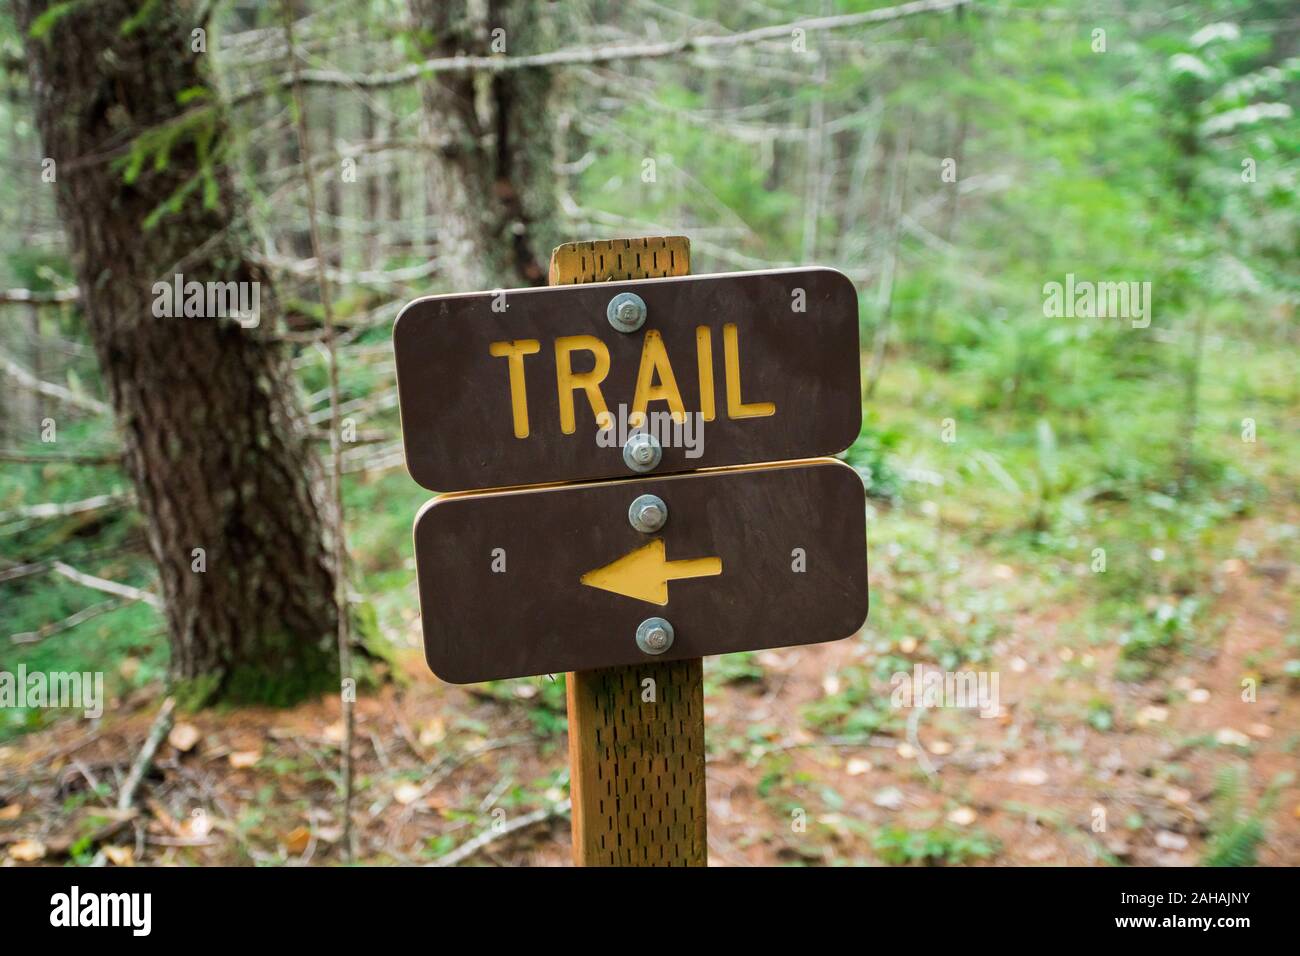 Hking Trail Sign With Direction Arrow Pointing Left Stock Photo